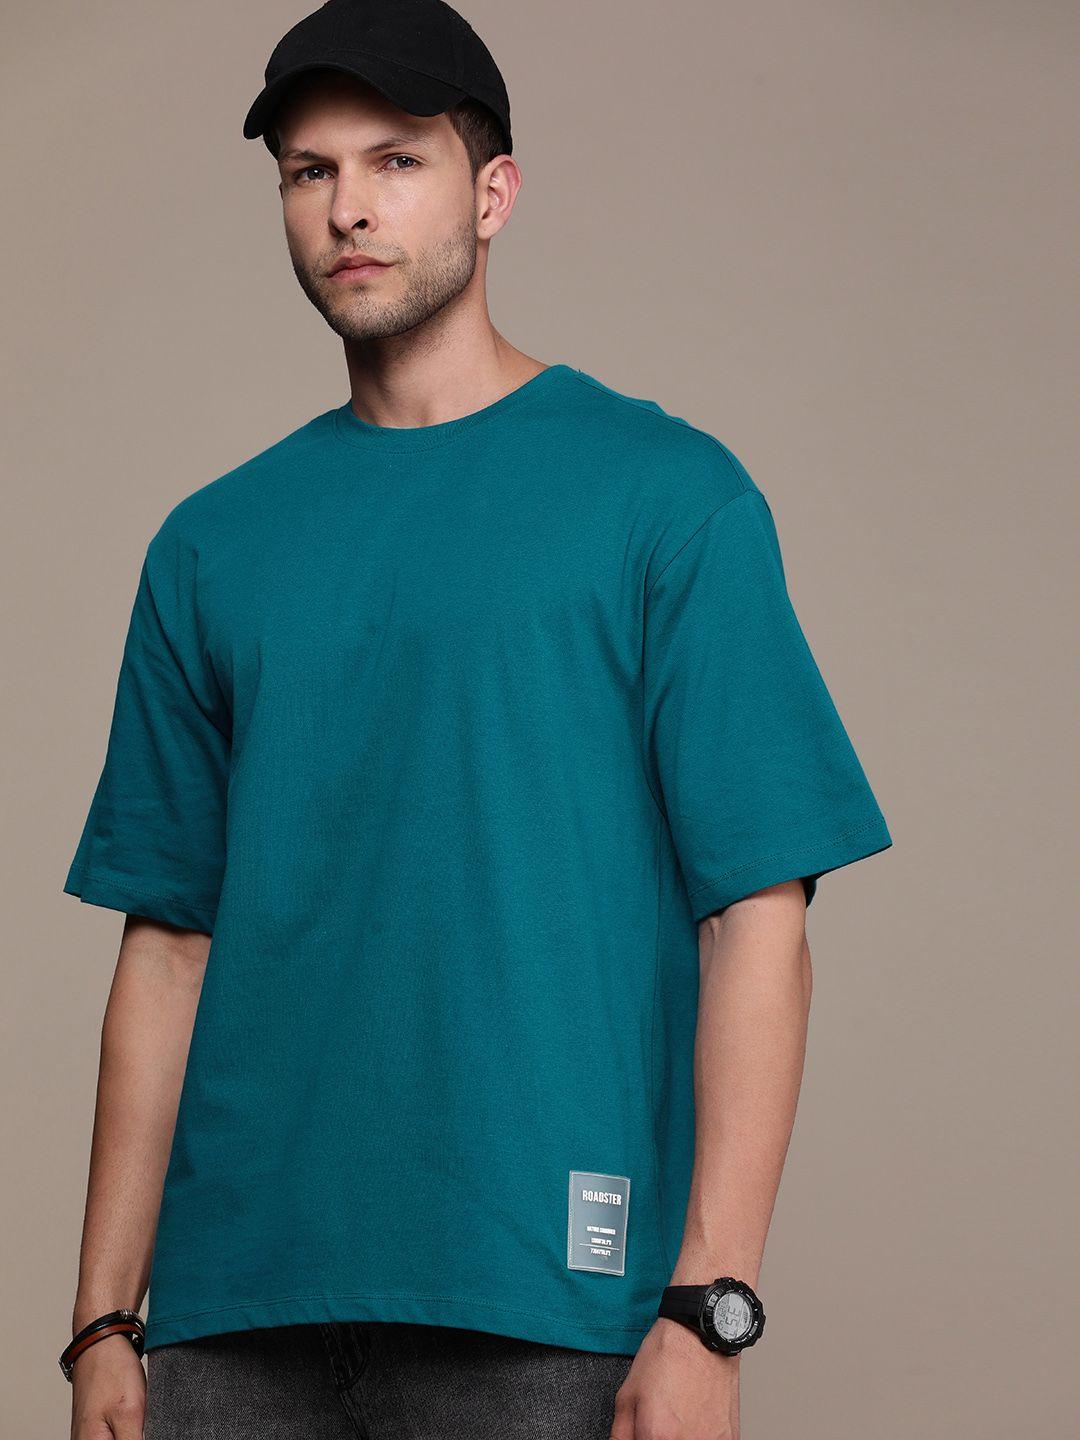 the roadster lifestyle co. oversized fit pure cotton t-shirt